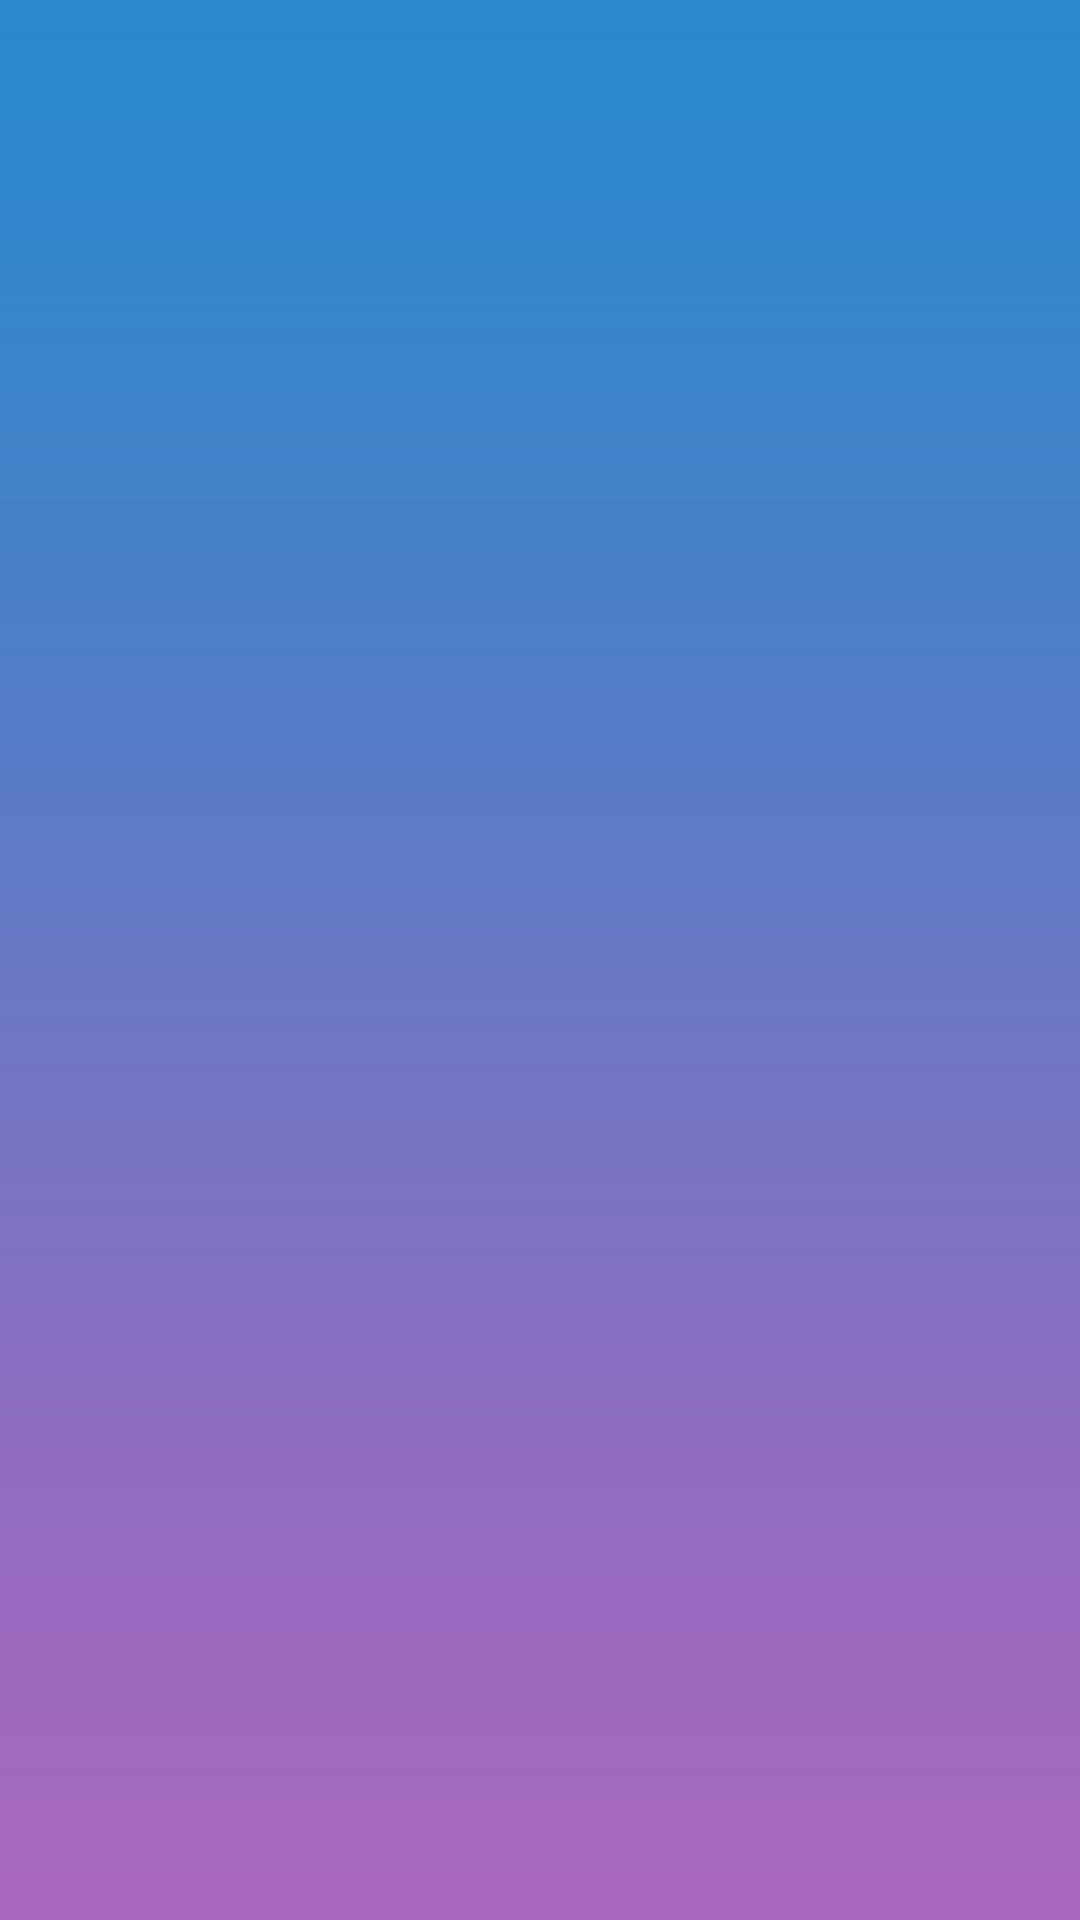 Gradient iPhone X Wallpaper with high-resolution 1080x1920 pixel. You can use this wallpaper for your iPhone 5, 6, 7, 8, X, XS, XR backgrounds, Mobile Screensaver, or iPad Lock Screen